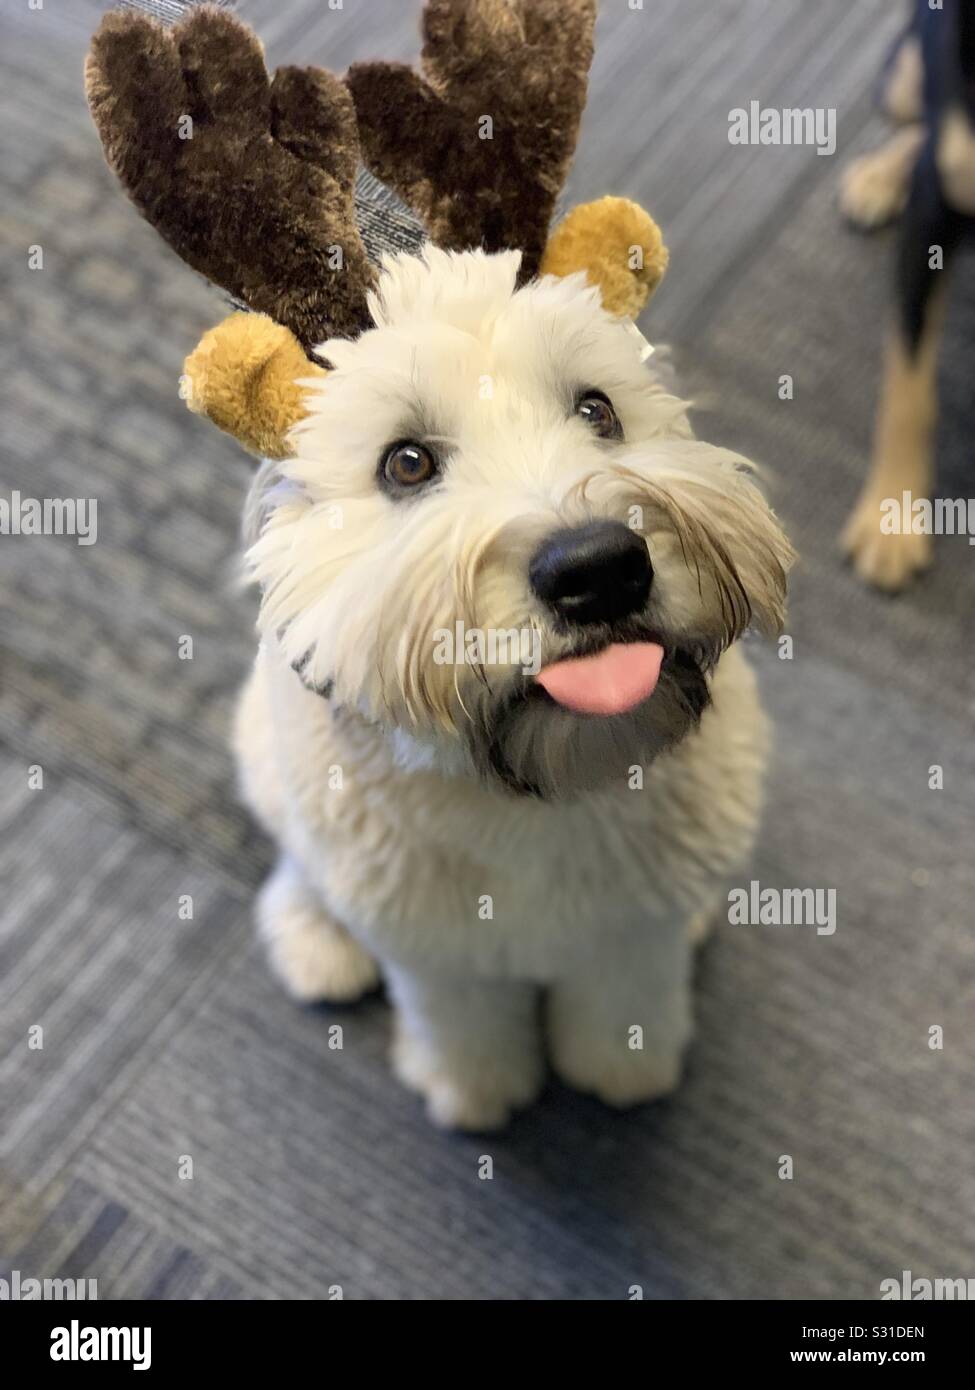 Silly dog Stock Photo